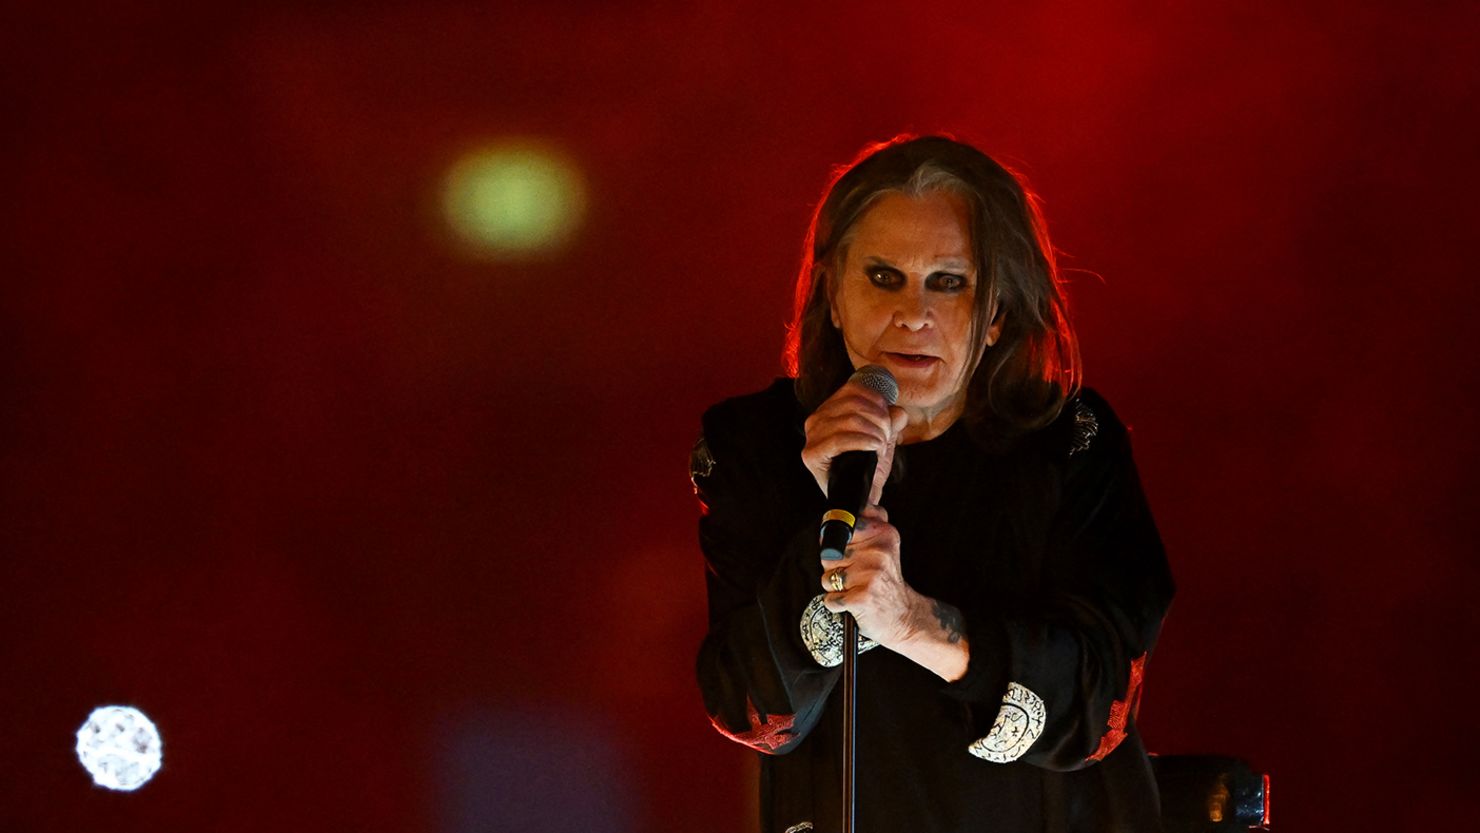 Ozzy Osbourne, pictured performing earlier this month at the 2022 Commonwealth Games, said he's leaving the US because of gun violence.